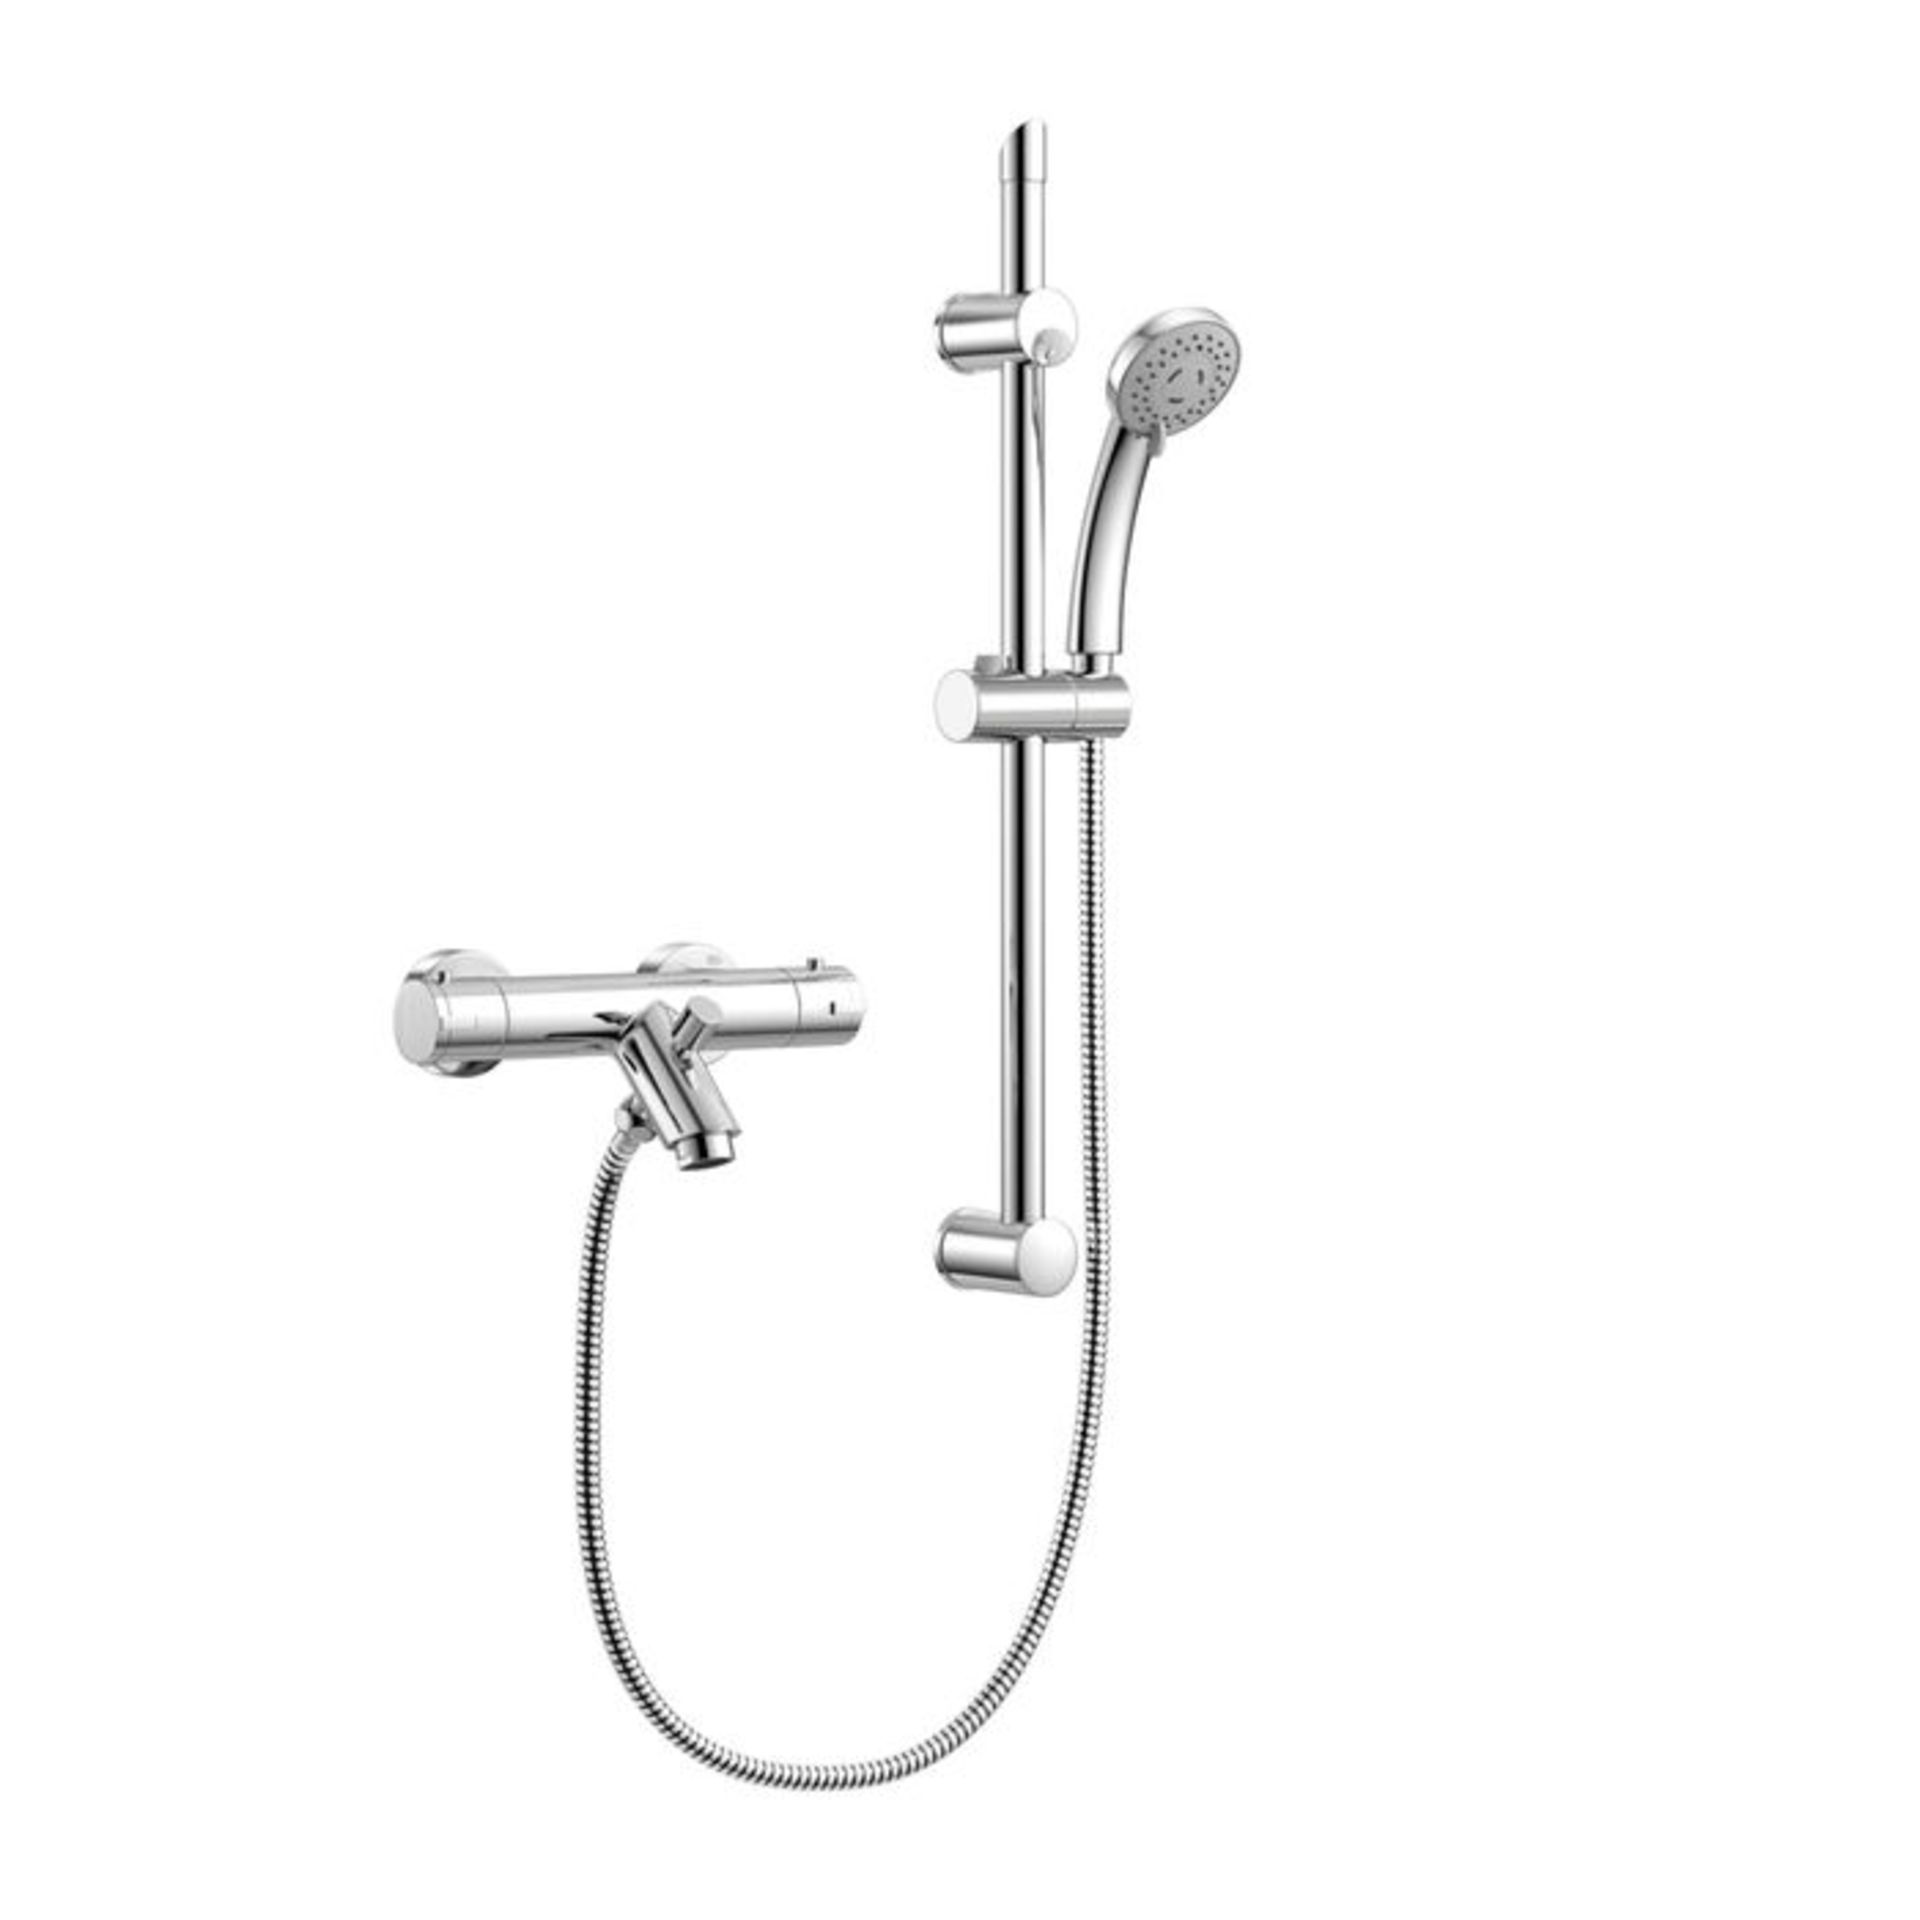 (TT164) Thermostatic Surface-mounted Bath tap + 3 Positions Shower set Chrome. RRP £382.99. ... - Image 3 of 3